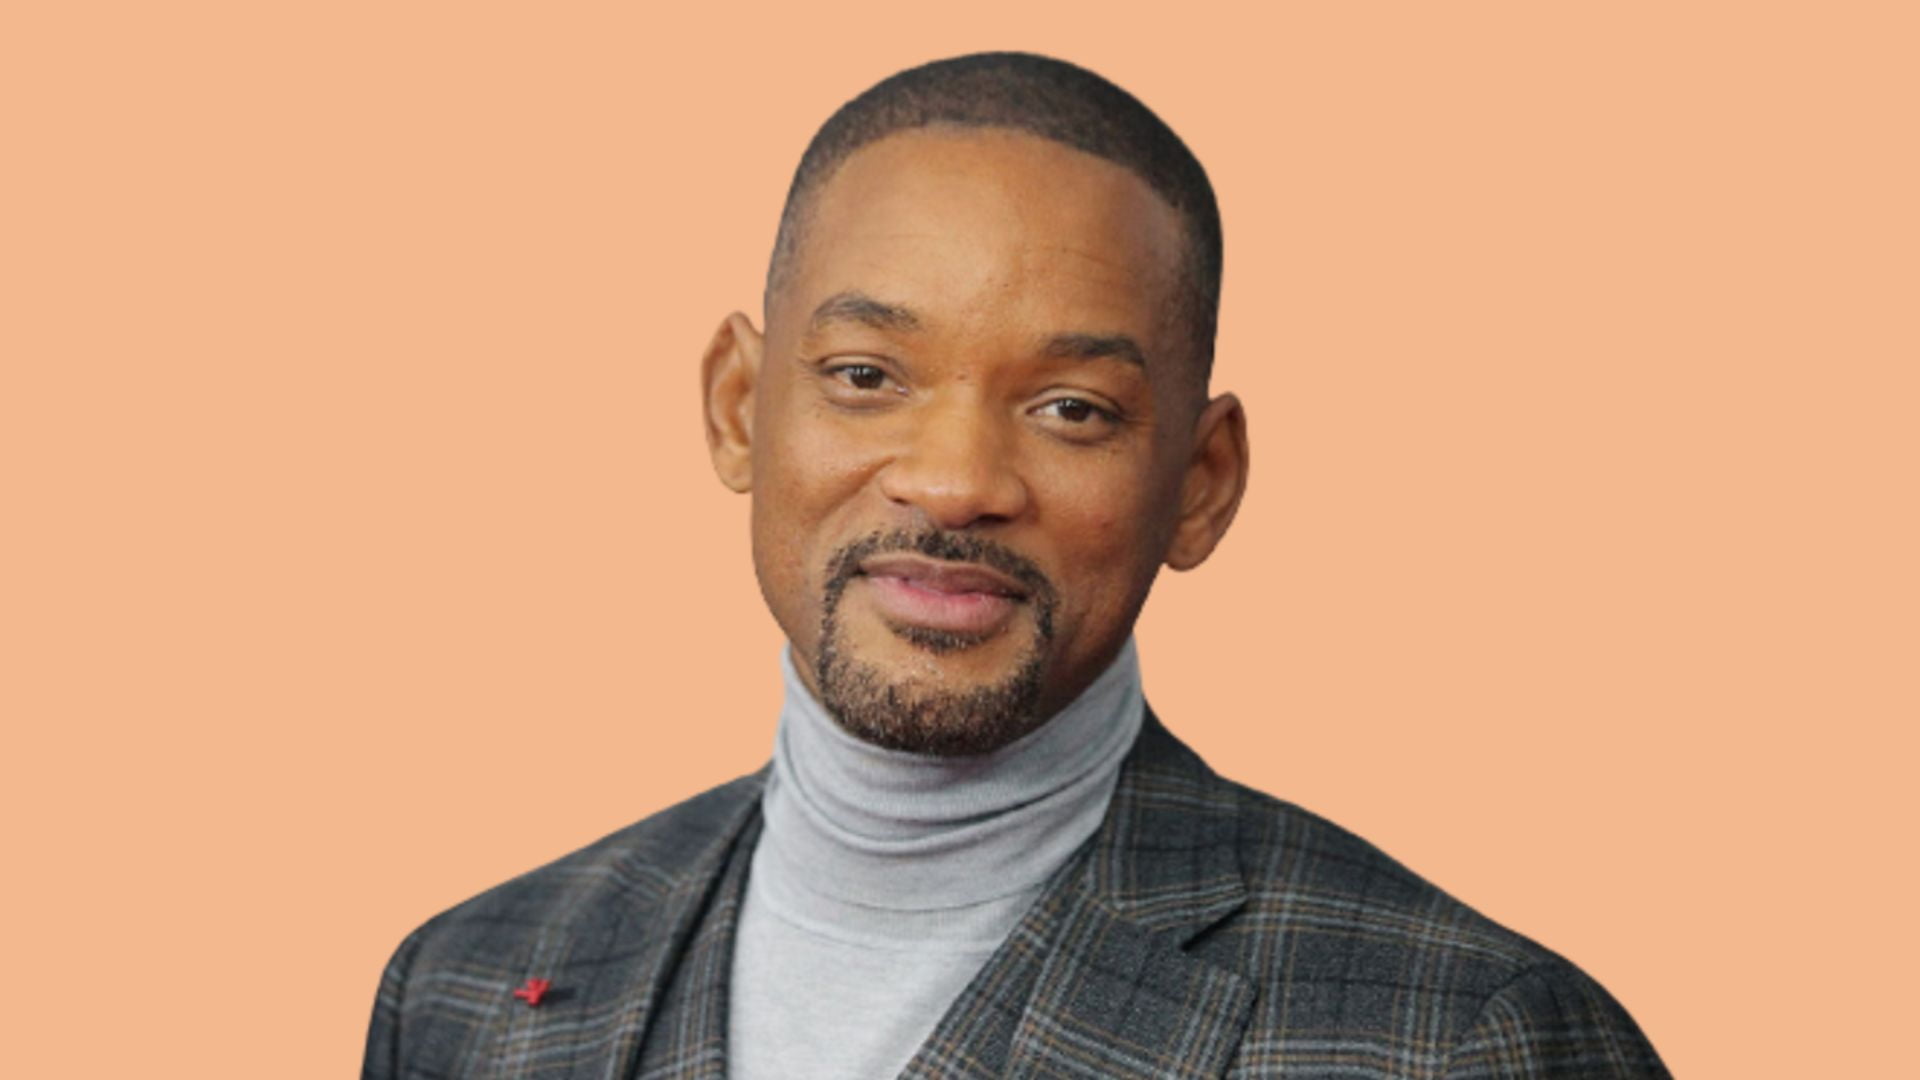 Will Smith Plastic Surgery: Before & After Photos Revealed